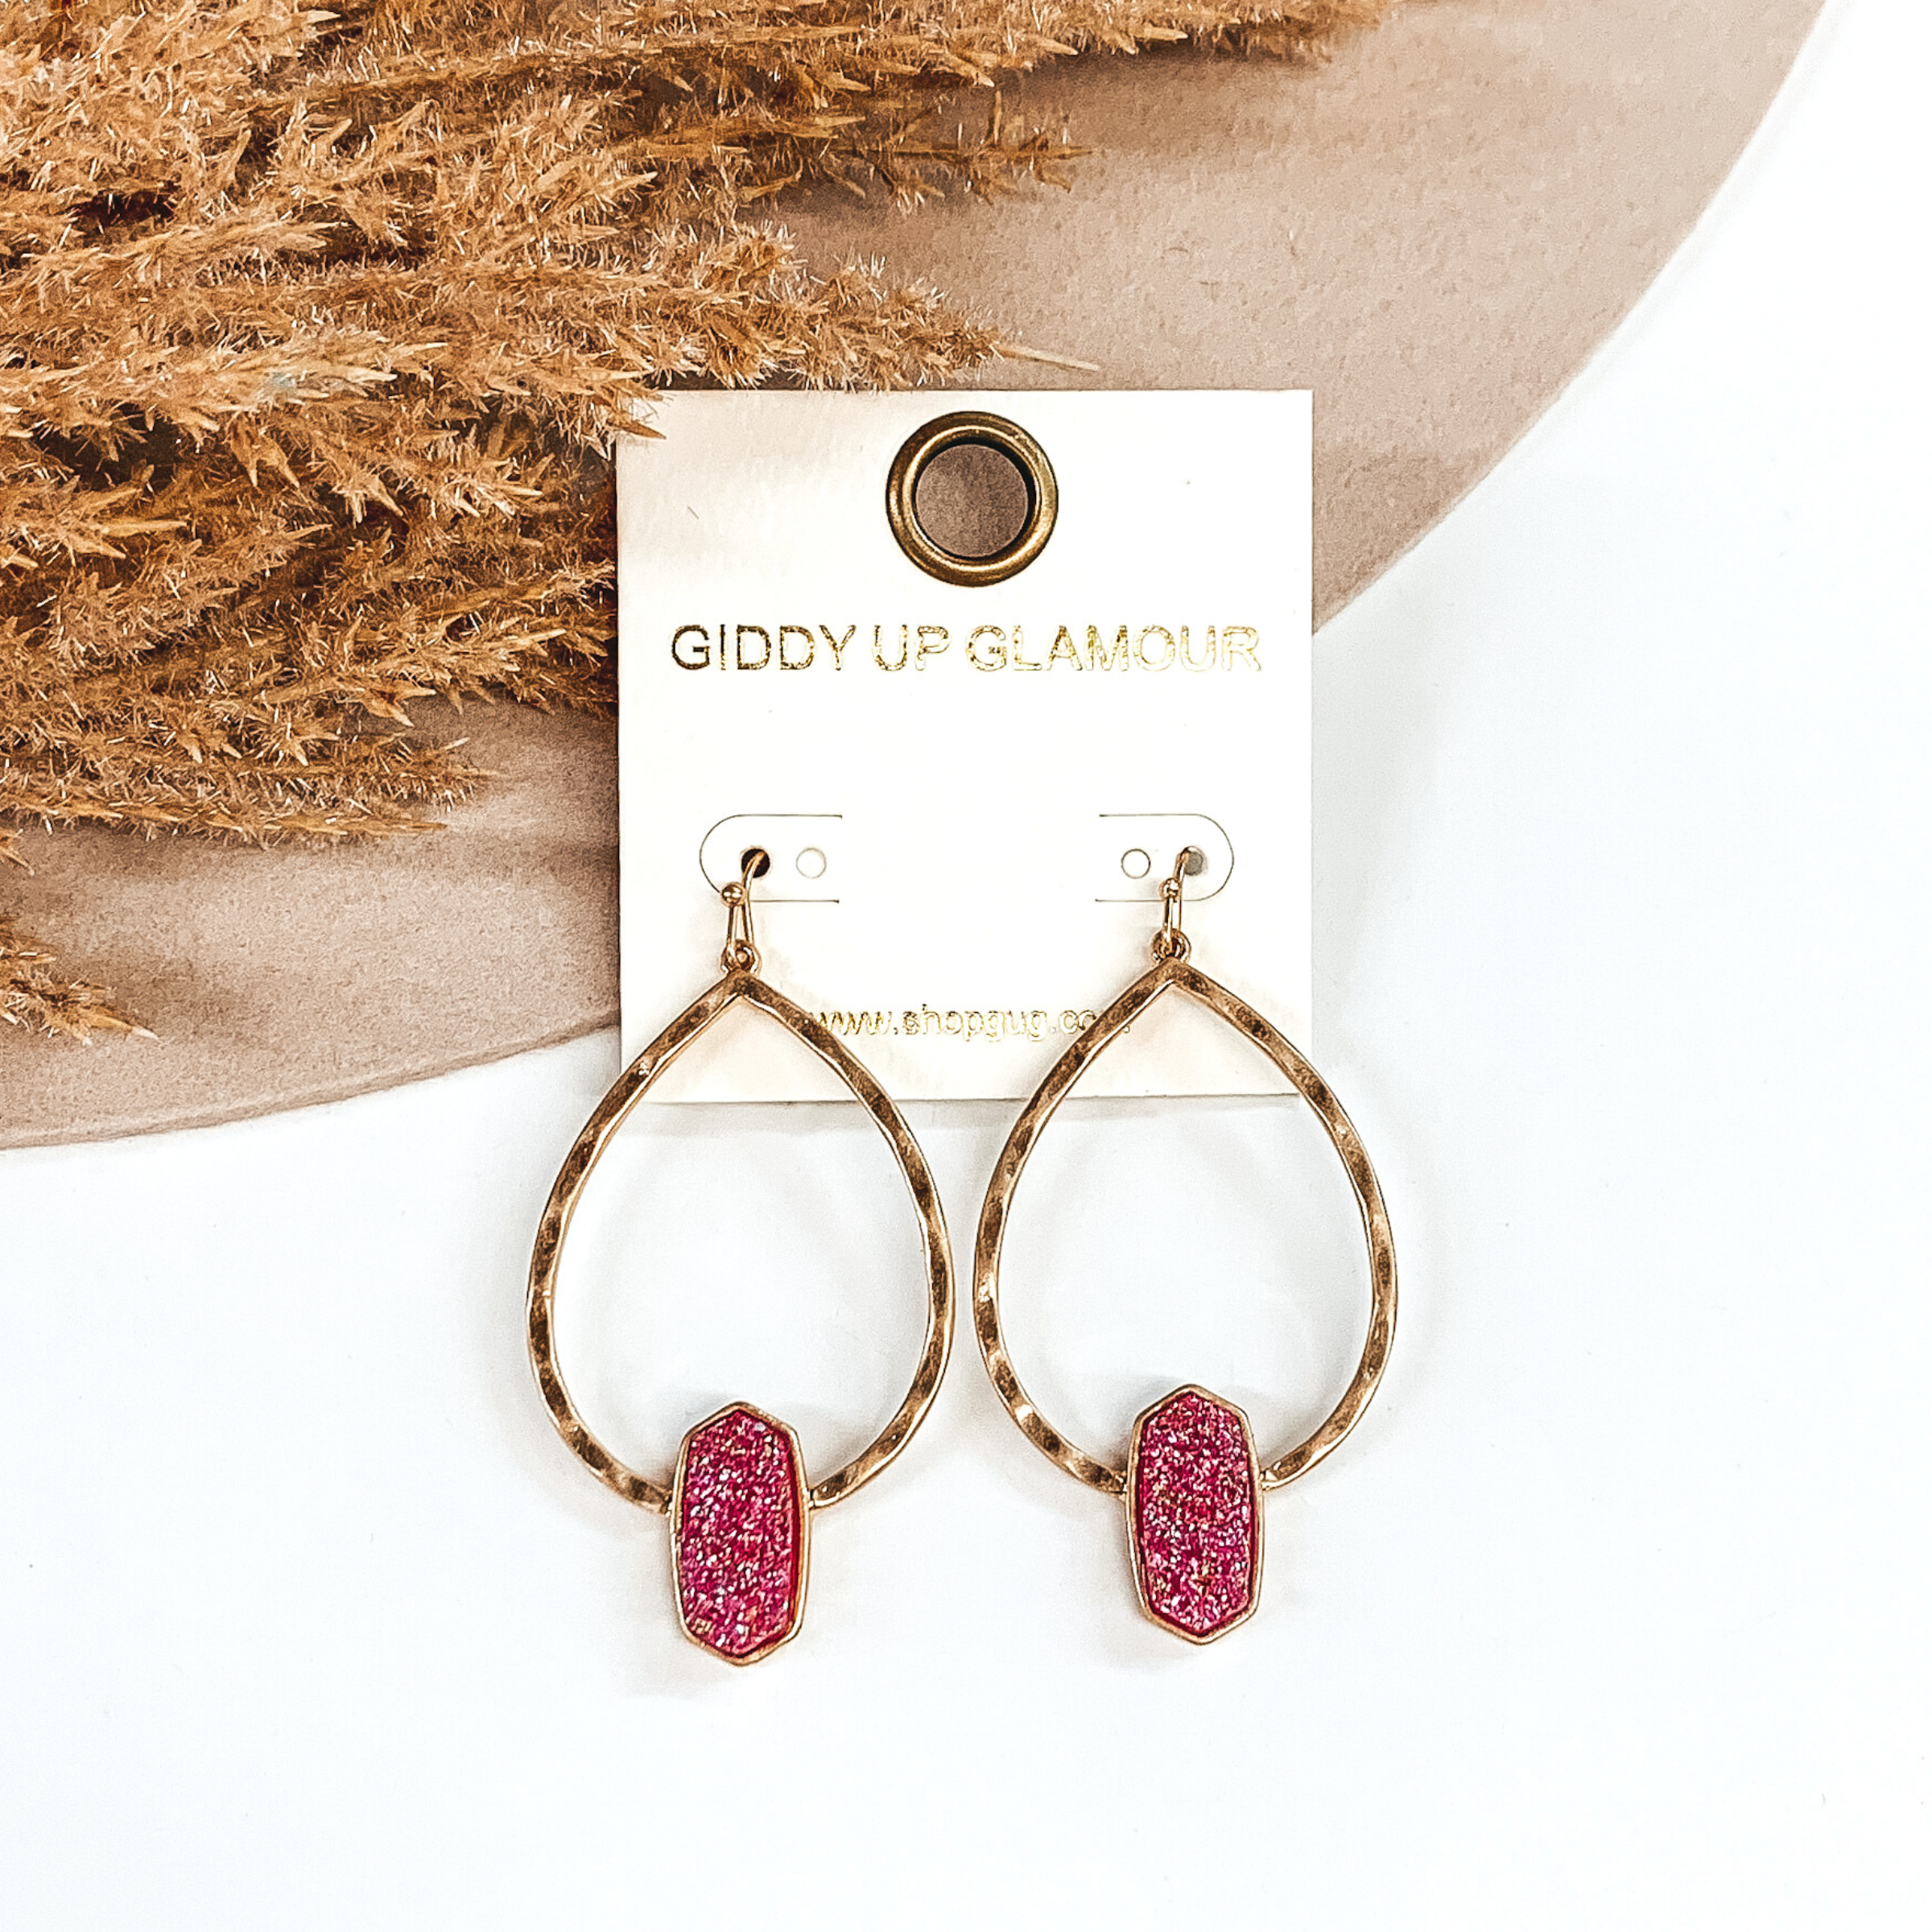 Gold hammered teardrop dangle earrings with a fuchsia druzy pendant at the bottom of the earrings. These are pictured on a white and beige background with some tan floral.